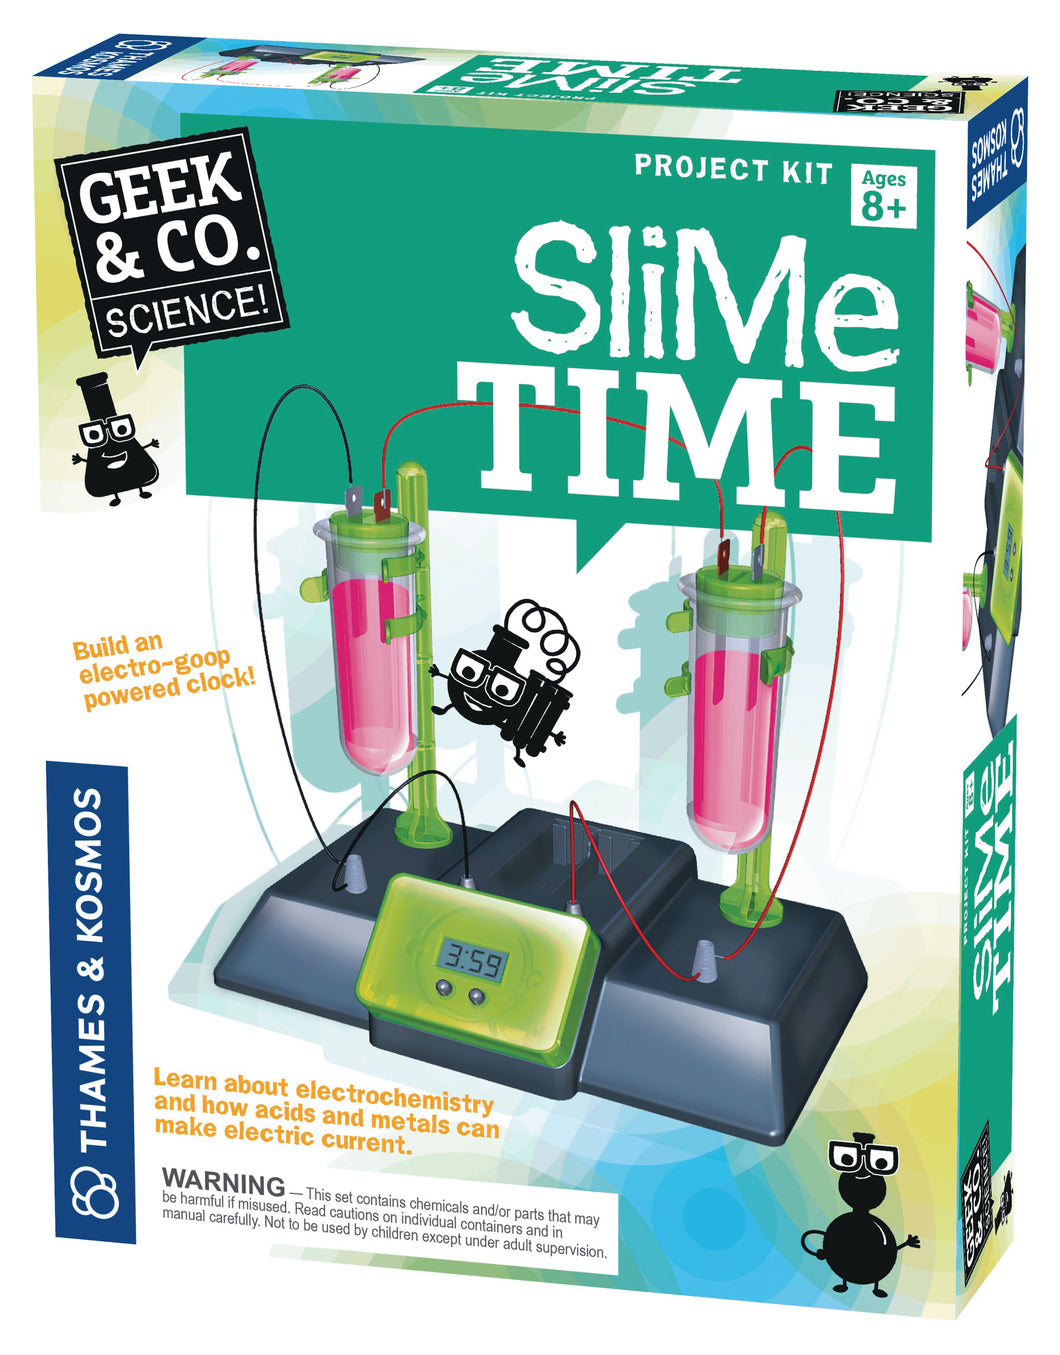 Slime Time by Geek & Co